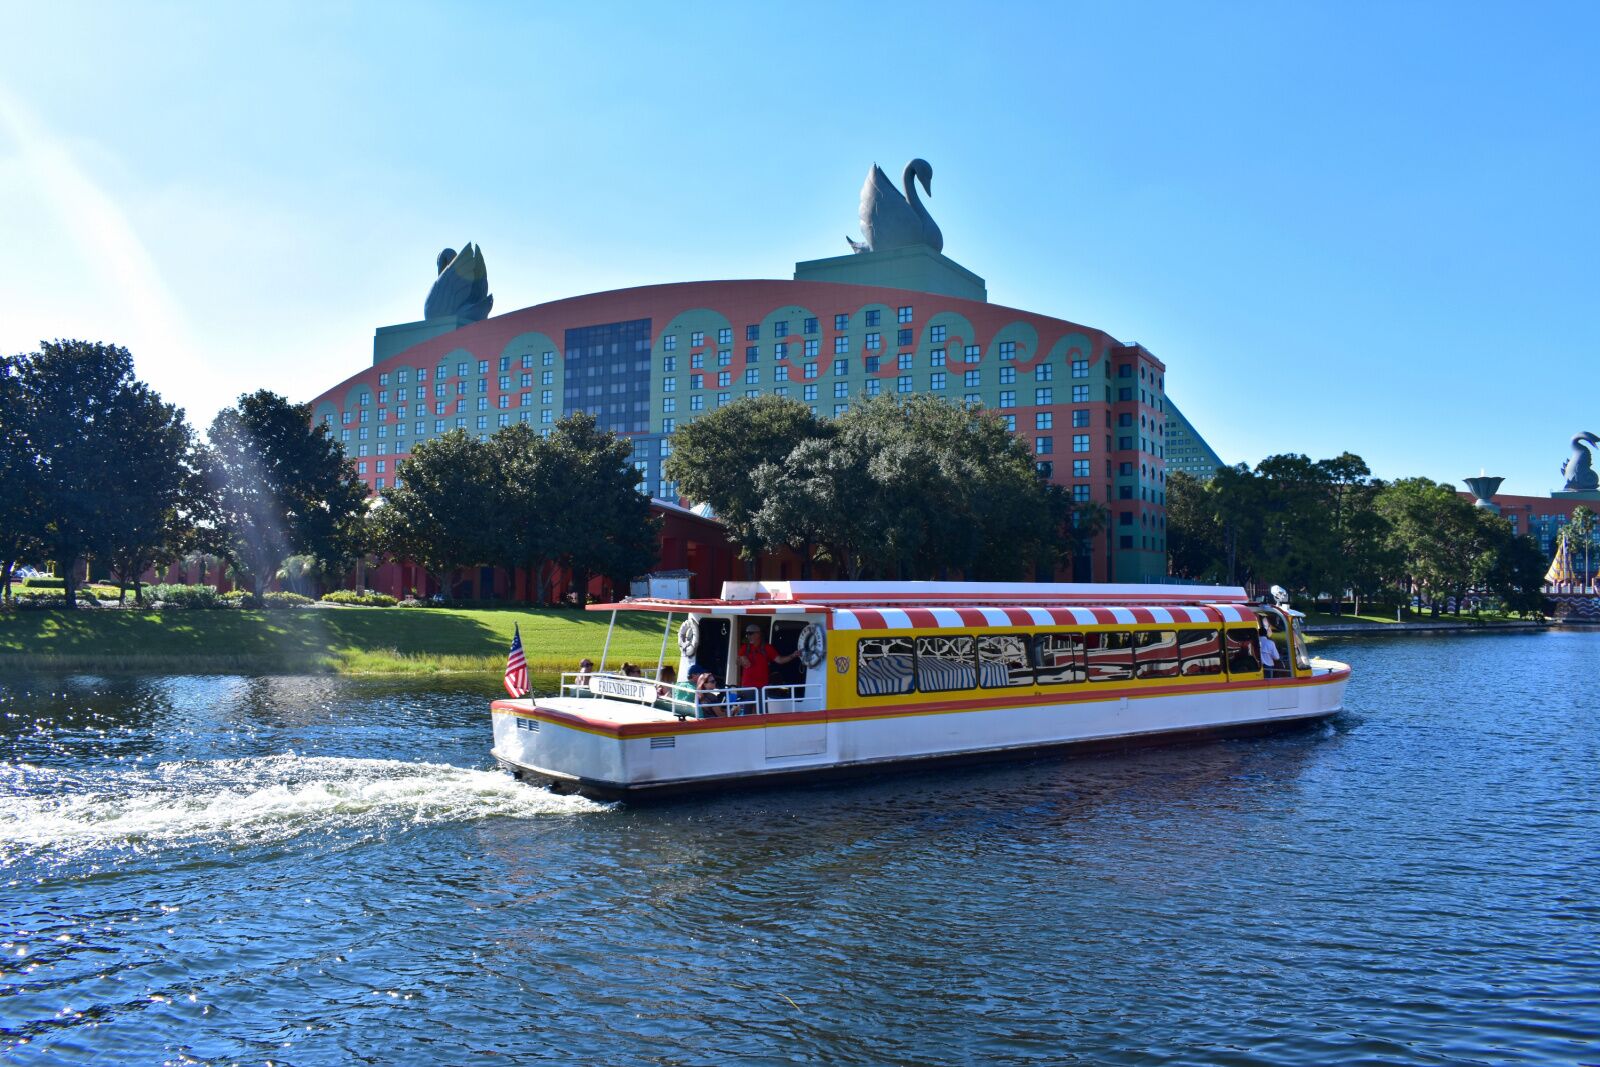 Disney world tips - stay at the swan hotel